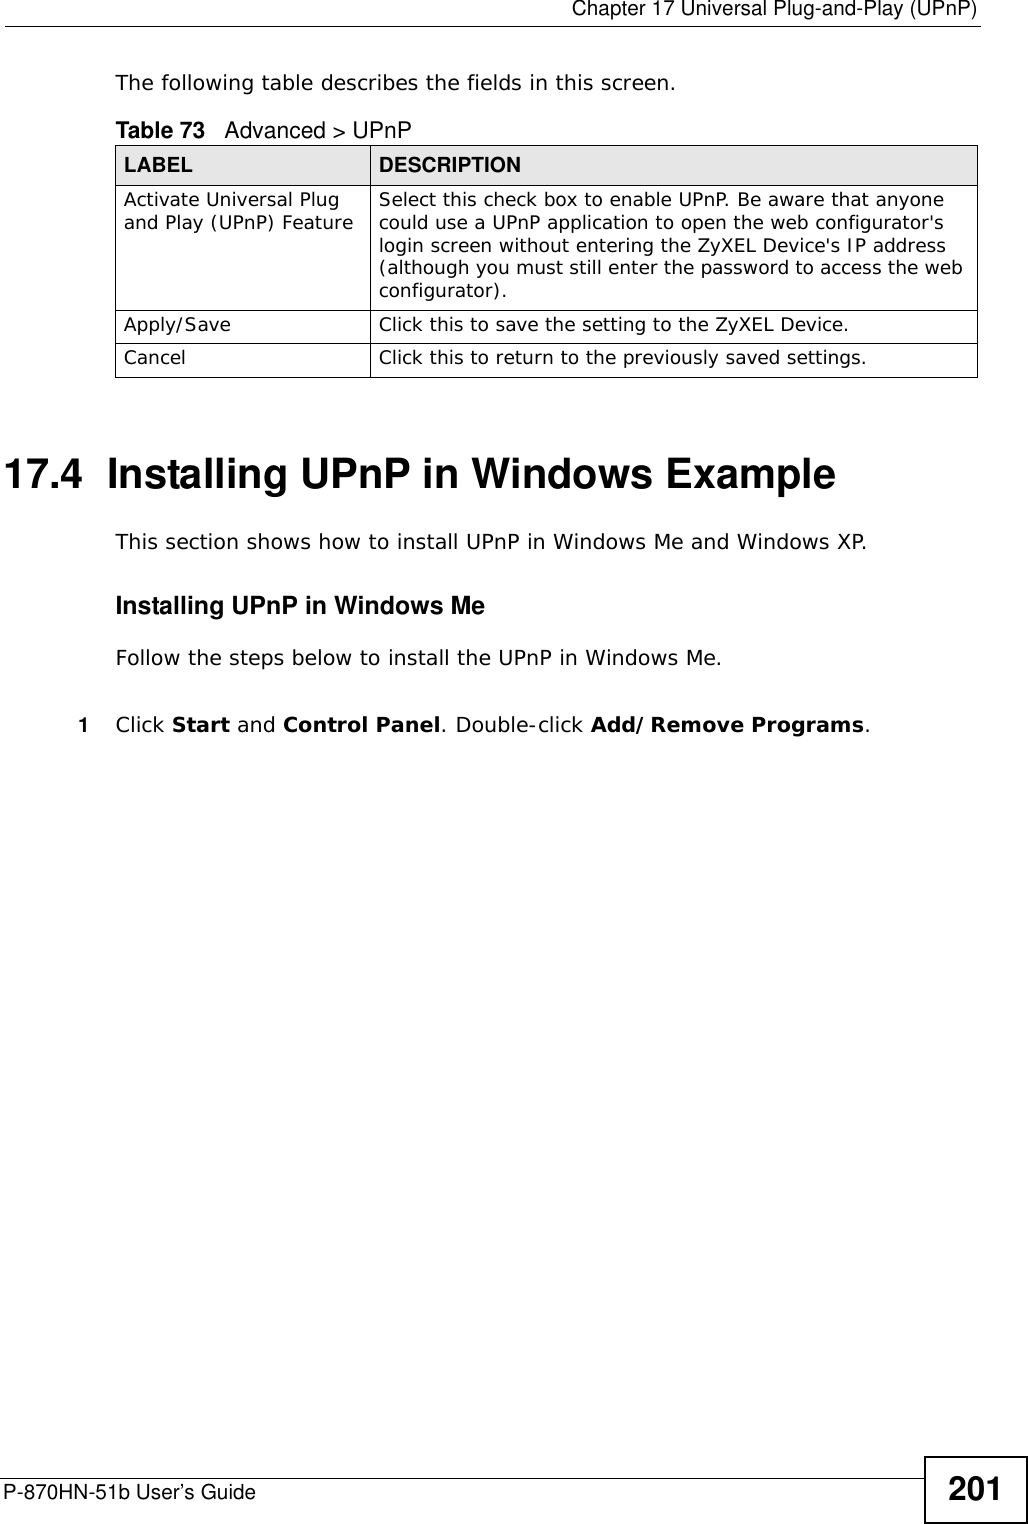  Chapter 17 Universal Plug-and-Play (UPnP)P-870HN-51b User’s Guide 201The following table describes the fields in this screen. 17.4  Installing UPnP in Windows ExampleThis section shows how to install UPnP in Windows Me and Windows XP. Installing UPnP in Windows MeFollow the steps below to install the UPnP in Windows Me. 1Click Start and Control Panel. Double-click Add/Remove Programs.Table 73   Advanced &gt; UPnPLABEL DESCRIPTIONActivate Universal Plug and Play (UPnP) Feature Select this check box to enable UPnP. Be aware that anyone could use a UPnP application to open the web configurator&apos;s login screen without entering the ZyXEL Device&apos;s IP address (although you must still enter the password to access the web configurator).Apply/Save Click this to save the setting to the ZyXEL Device.Cancel Click this to return to the previously saved settings.